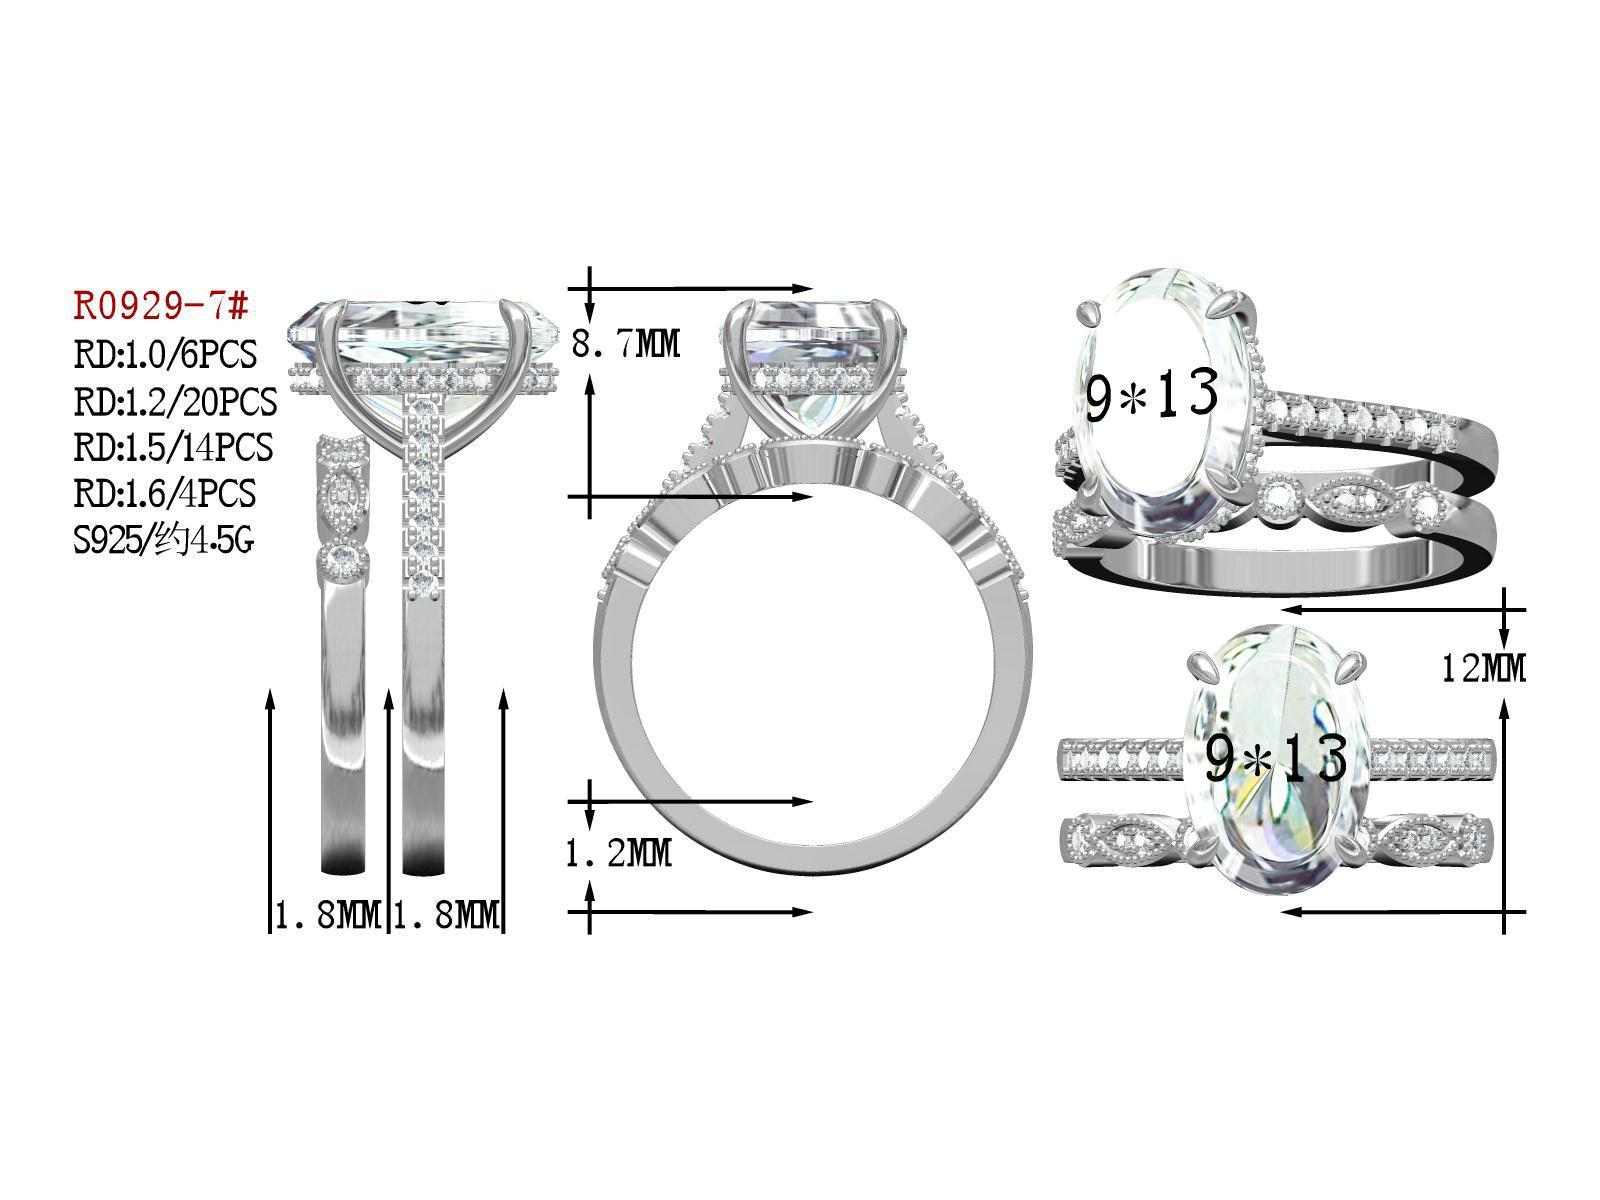 Engagement Ring and Wedding Band Set - HERS